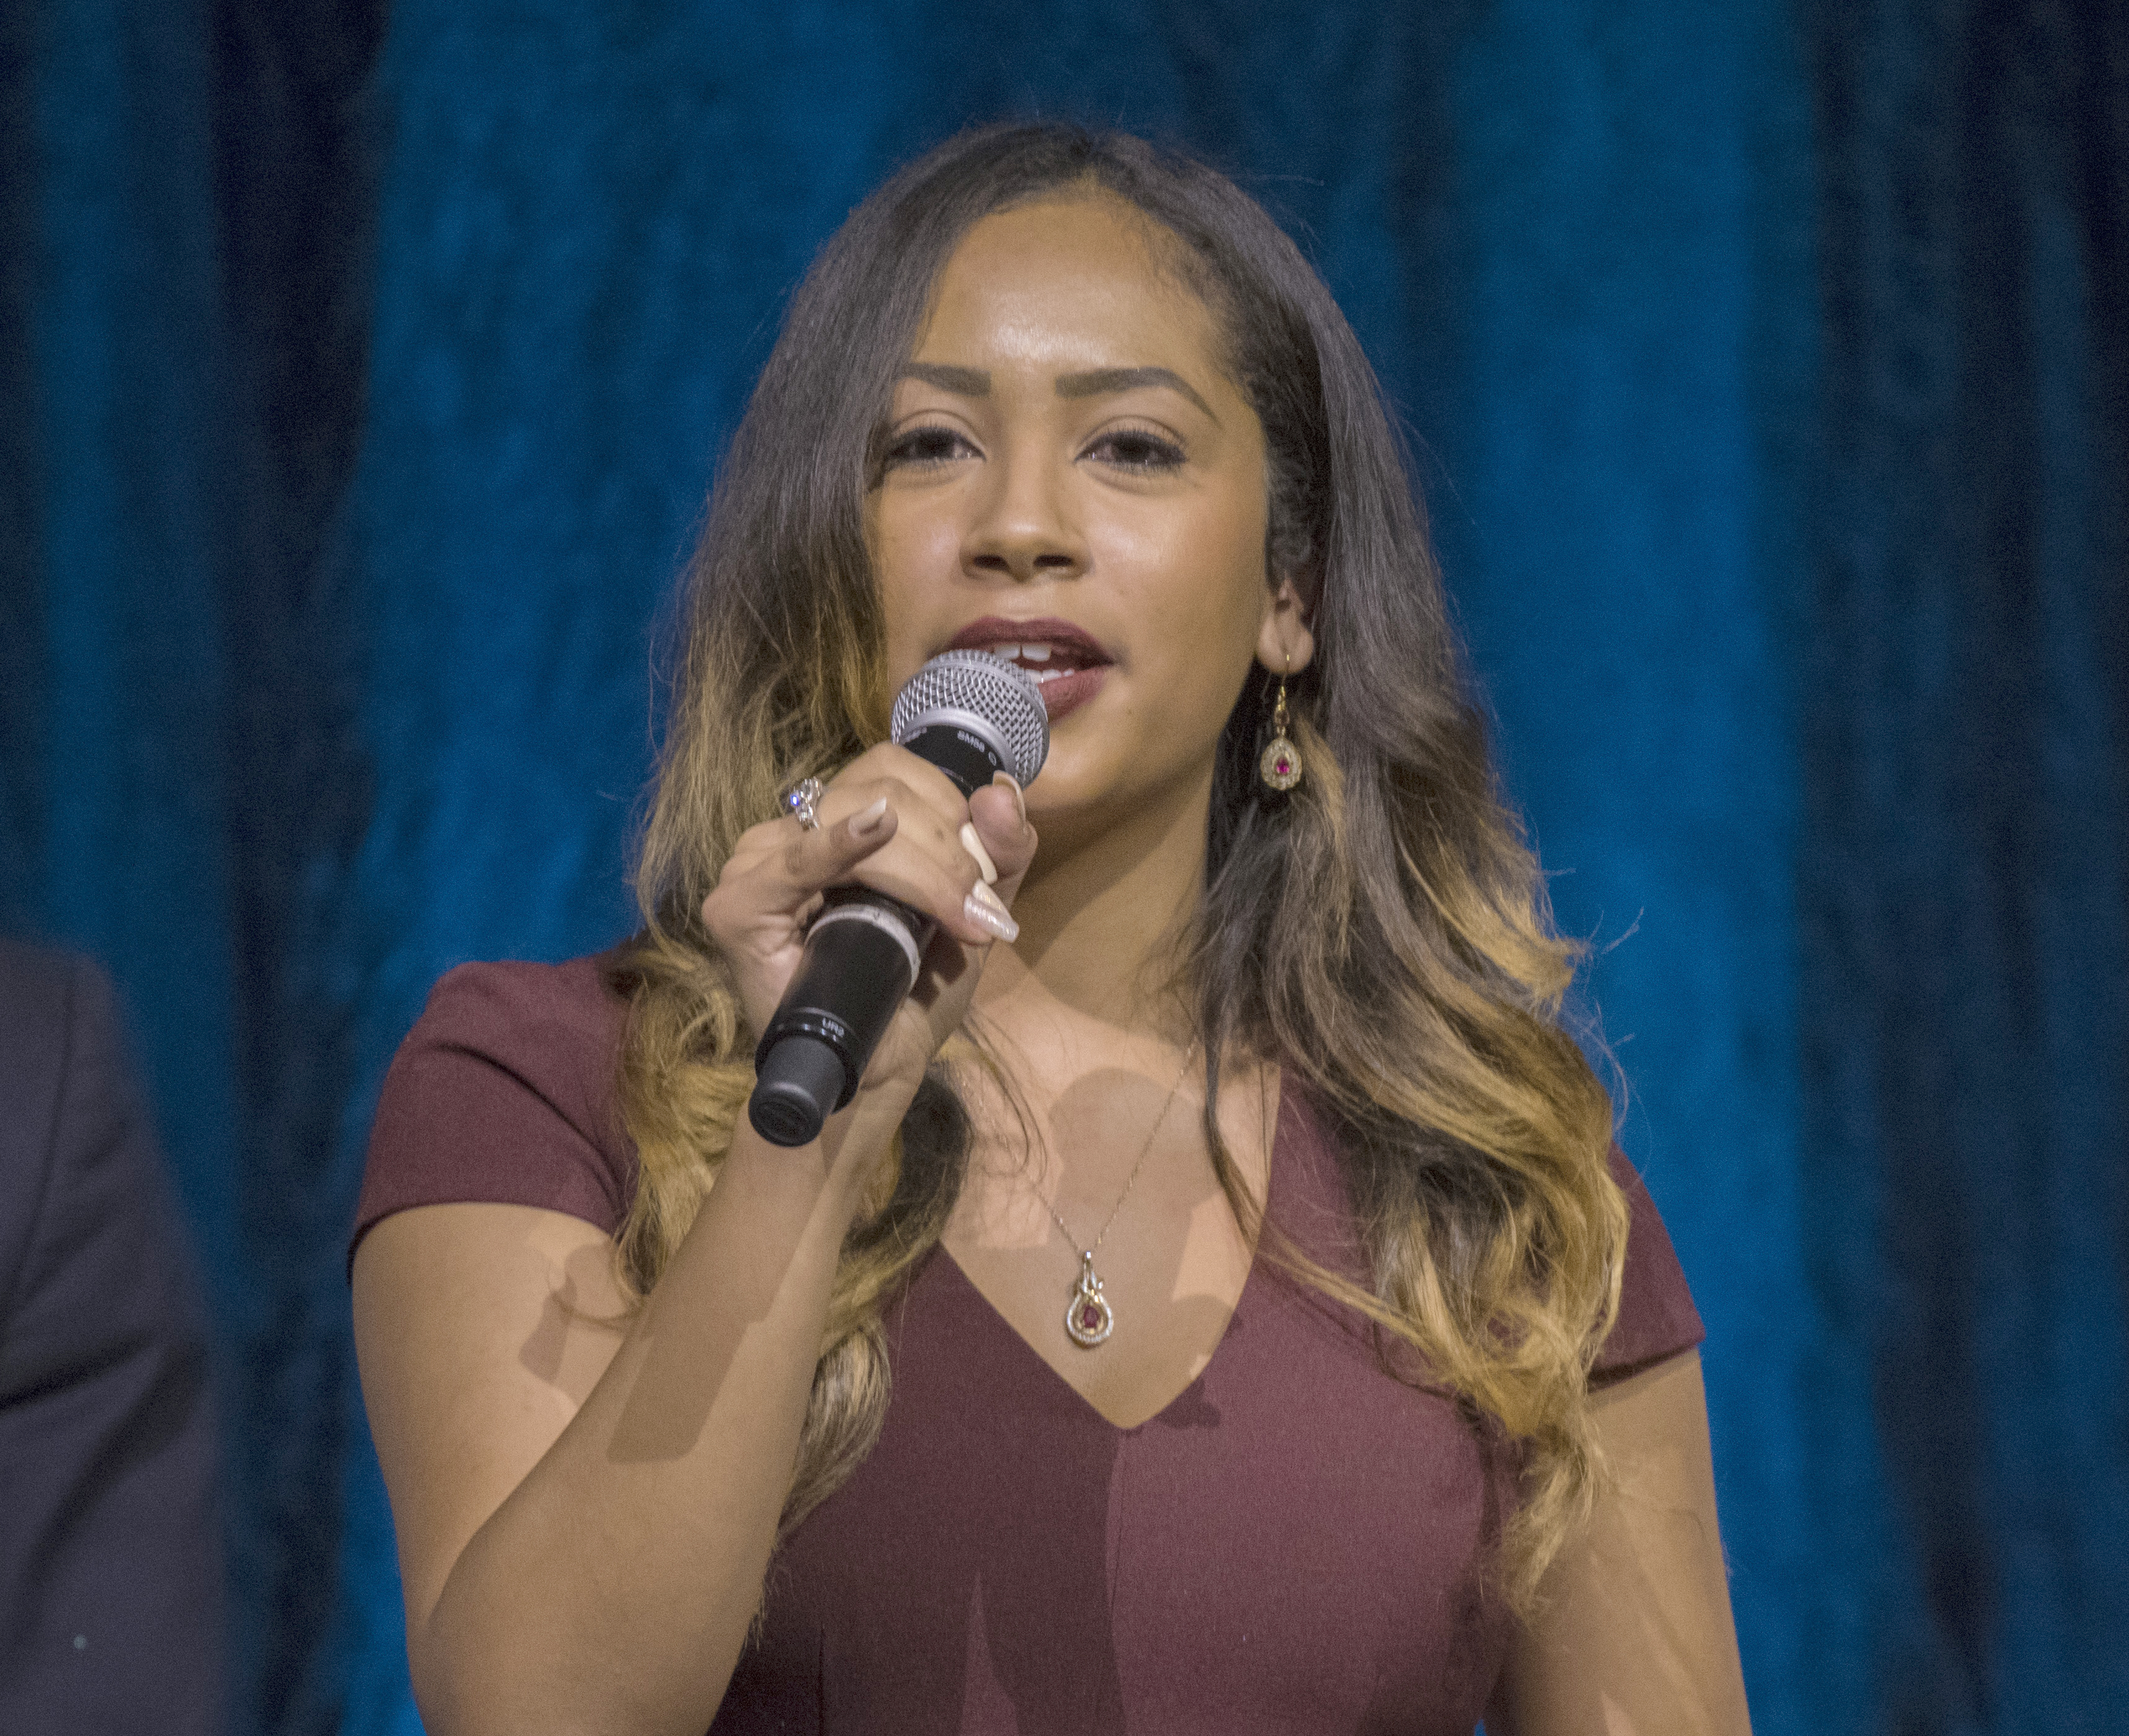 Hispanic woman in a maroon dress speaking into a microphone